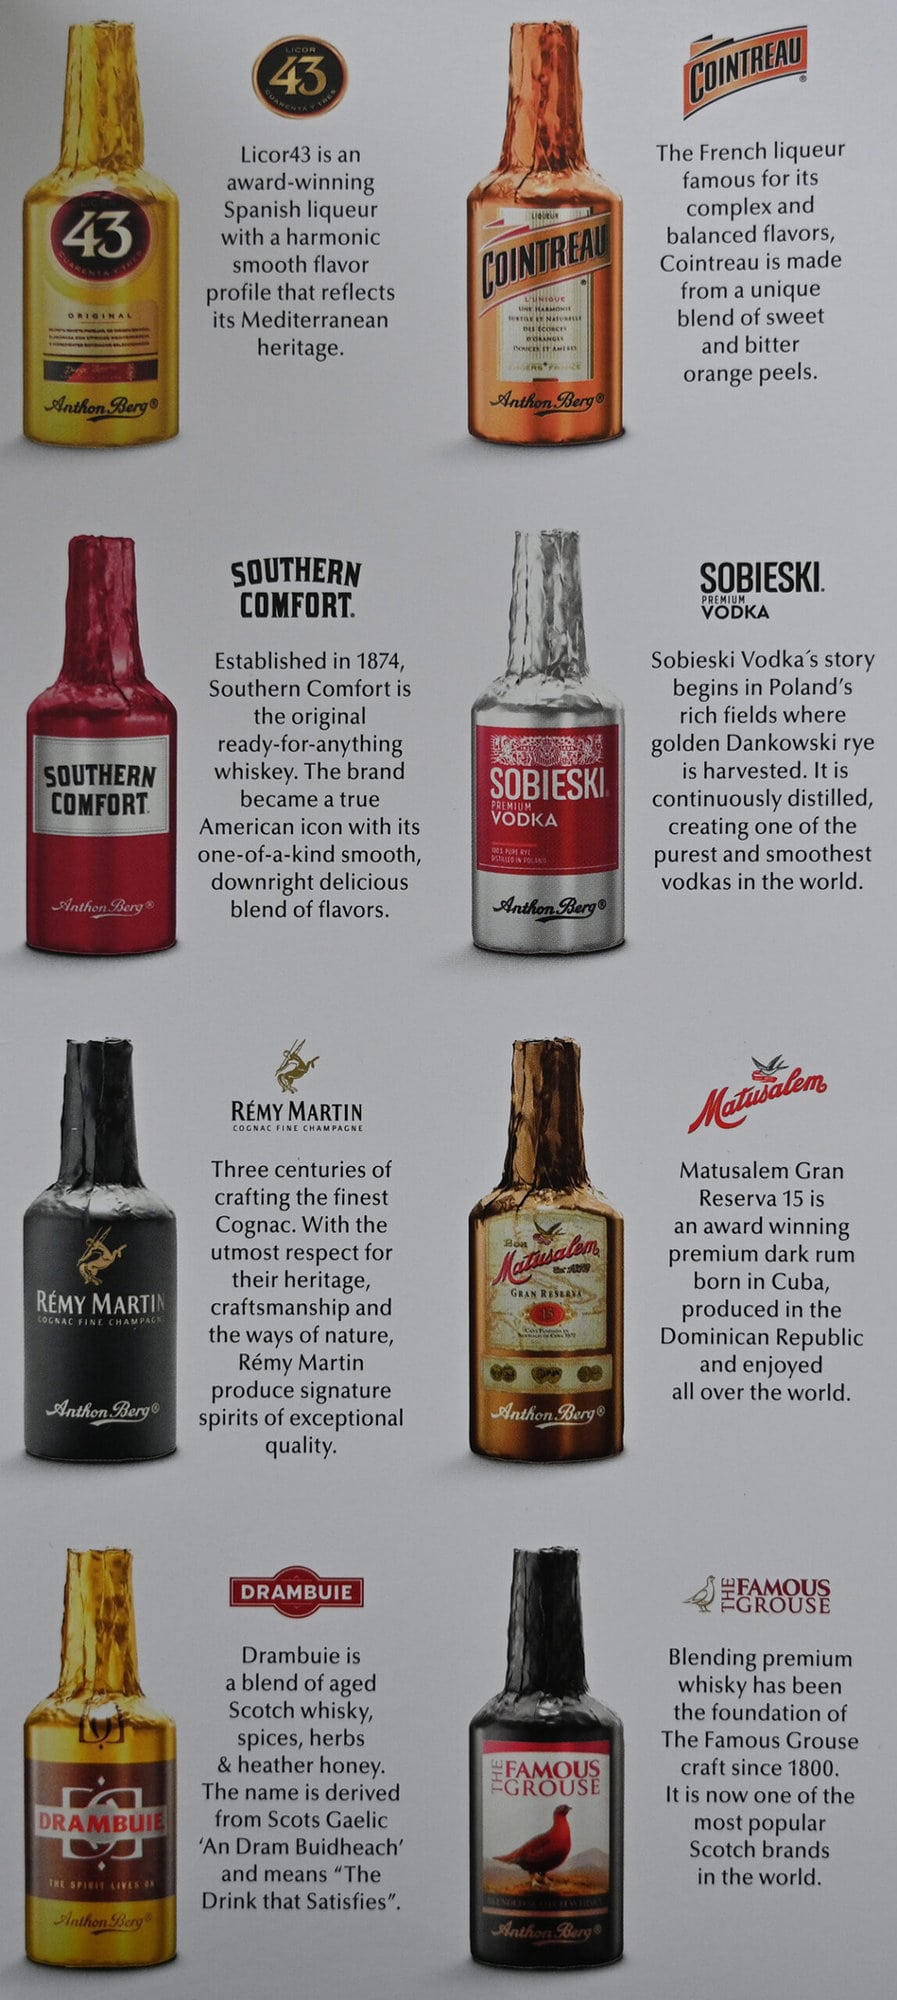 Image of all the eight different kinds of liquor in the chocolates with a description beside each brand of liquor.